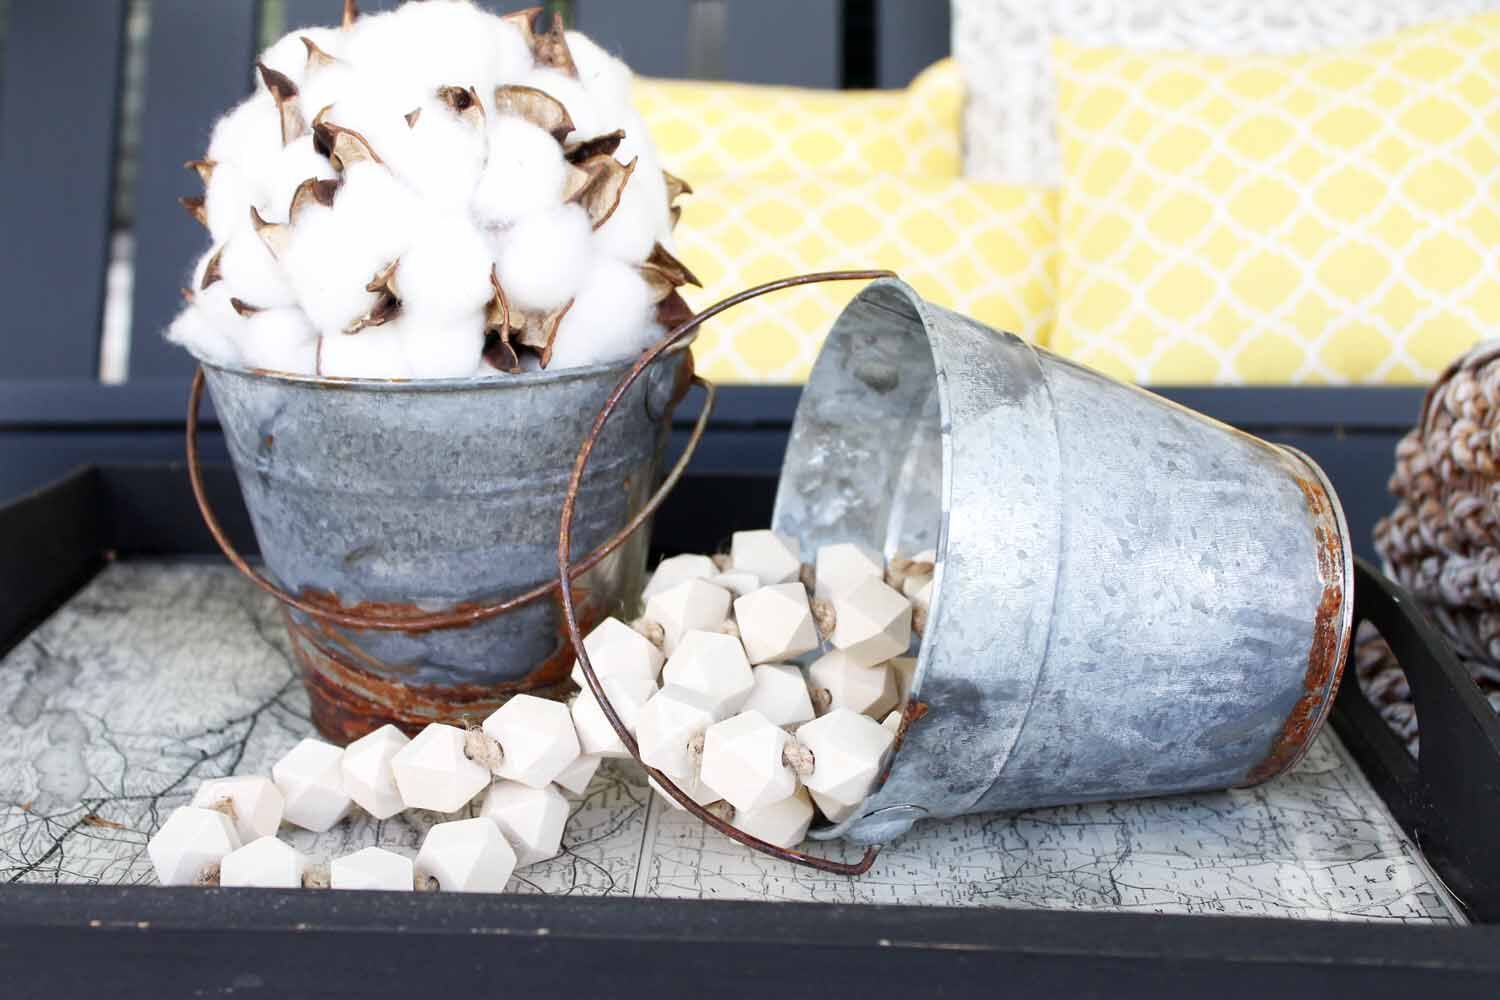 Metal buckets looks so rustic and perfect for the farmhouse look